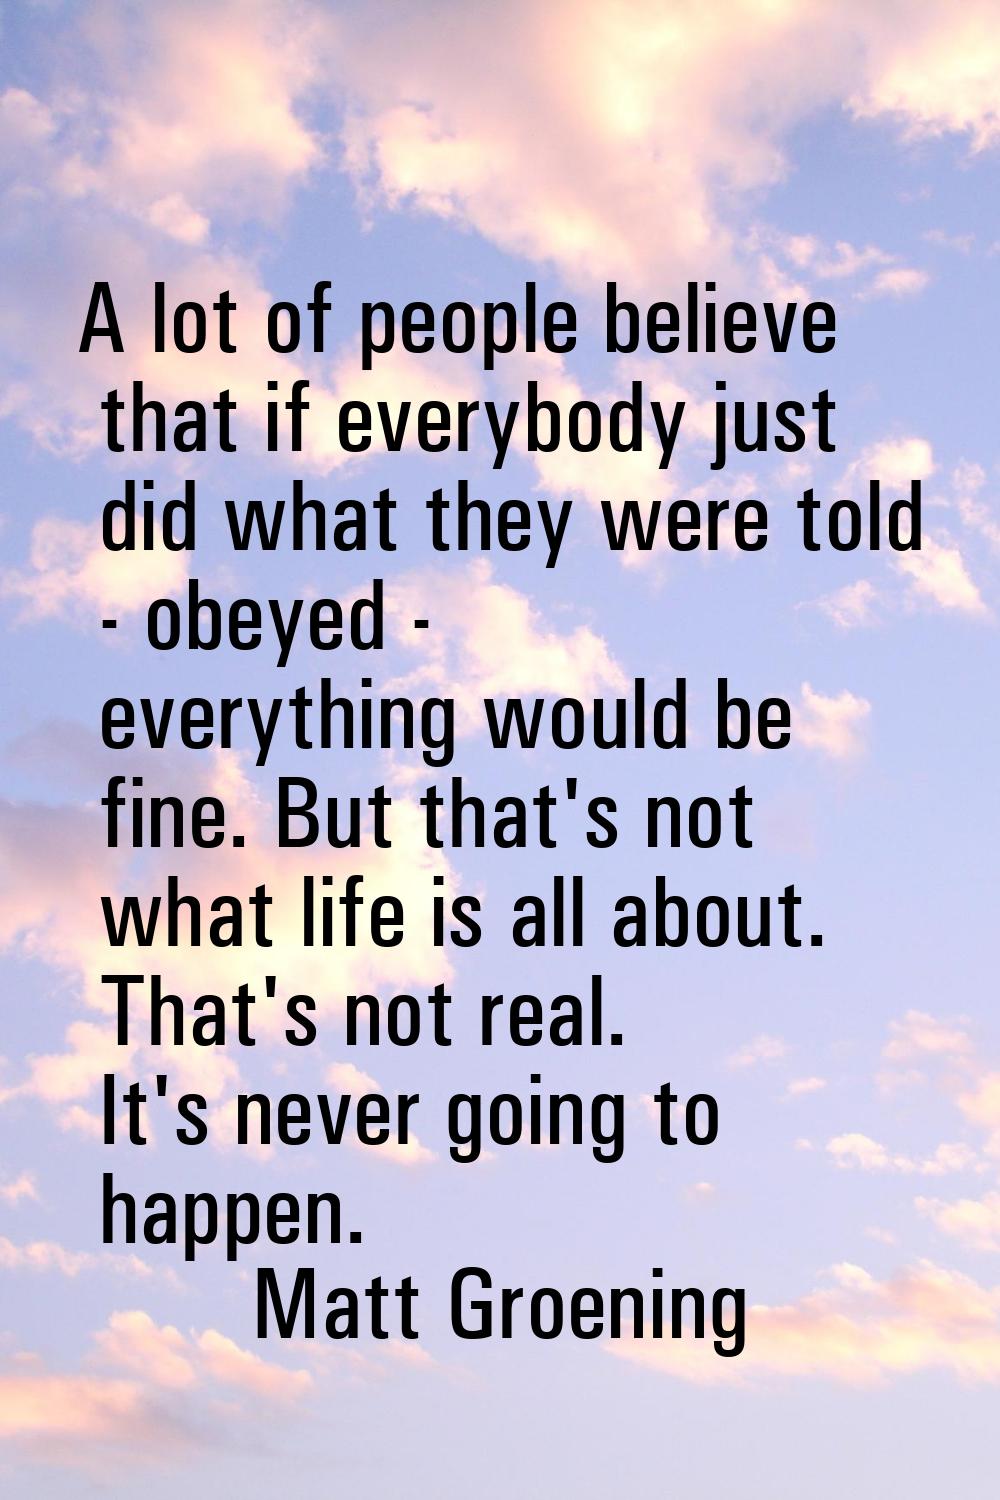 A lot of people believe that if everybody just did what they were told - obeyed - everything would 